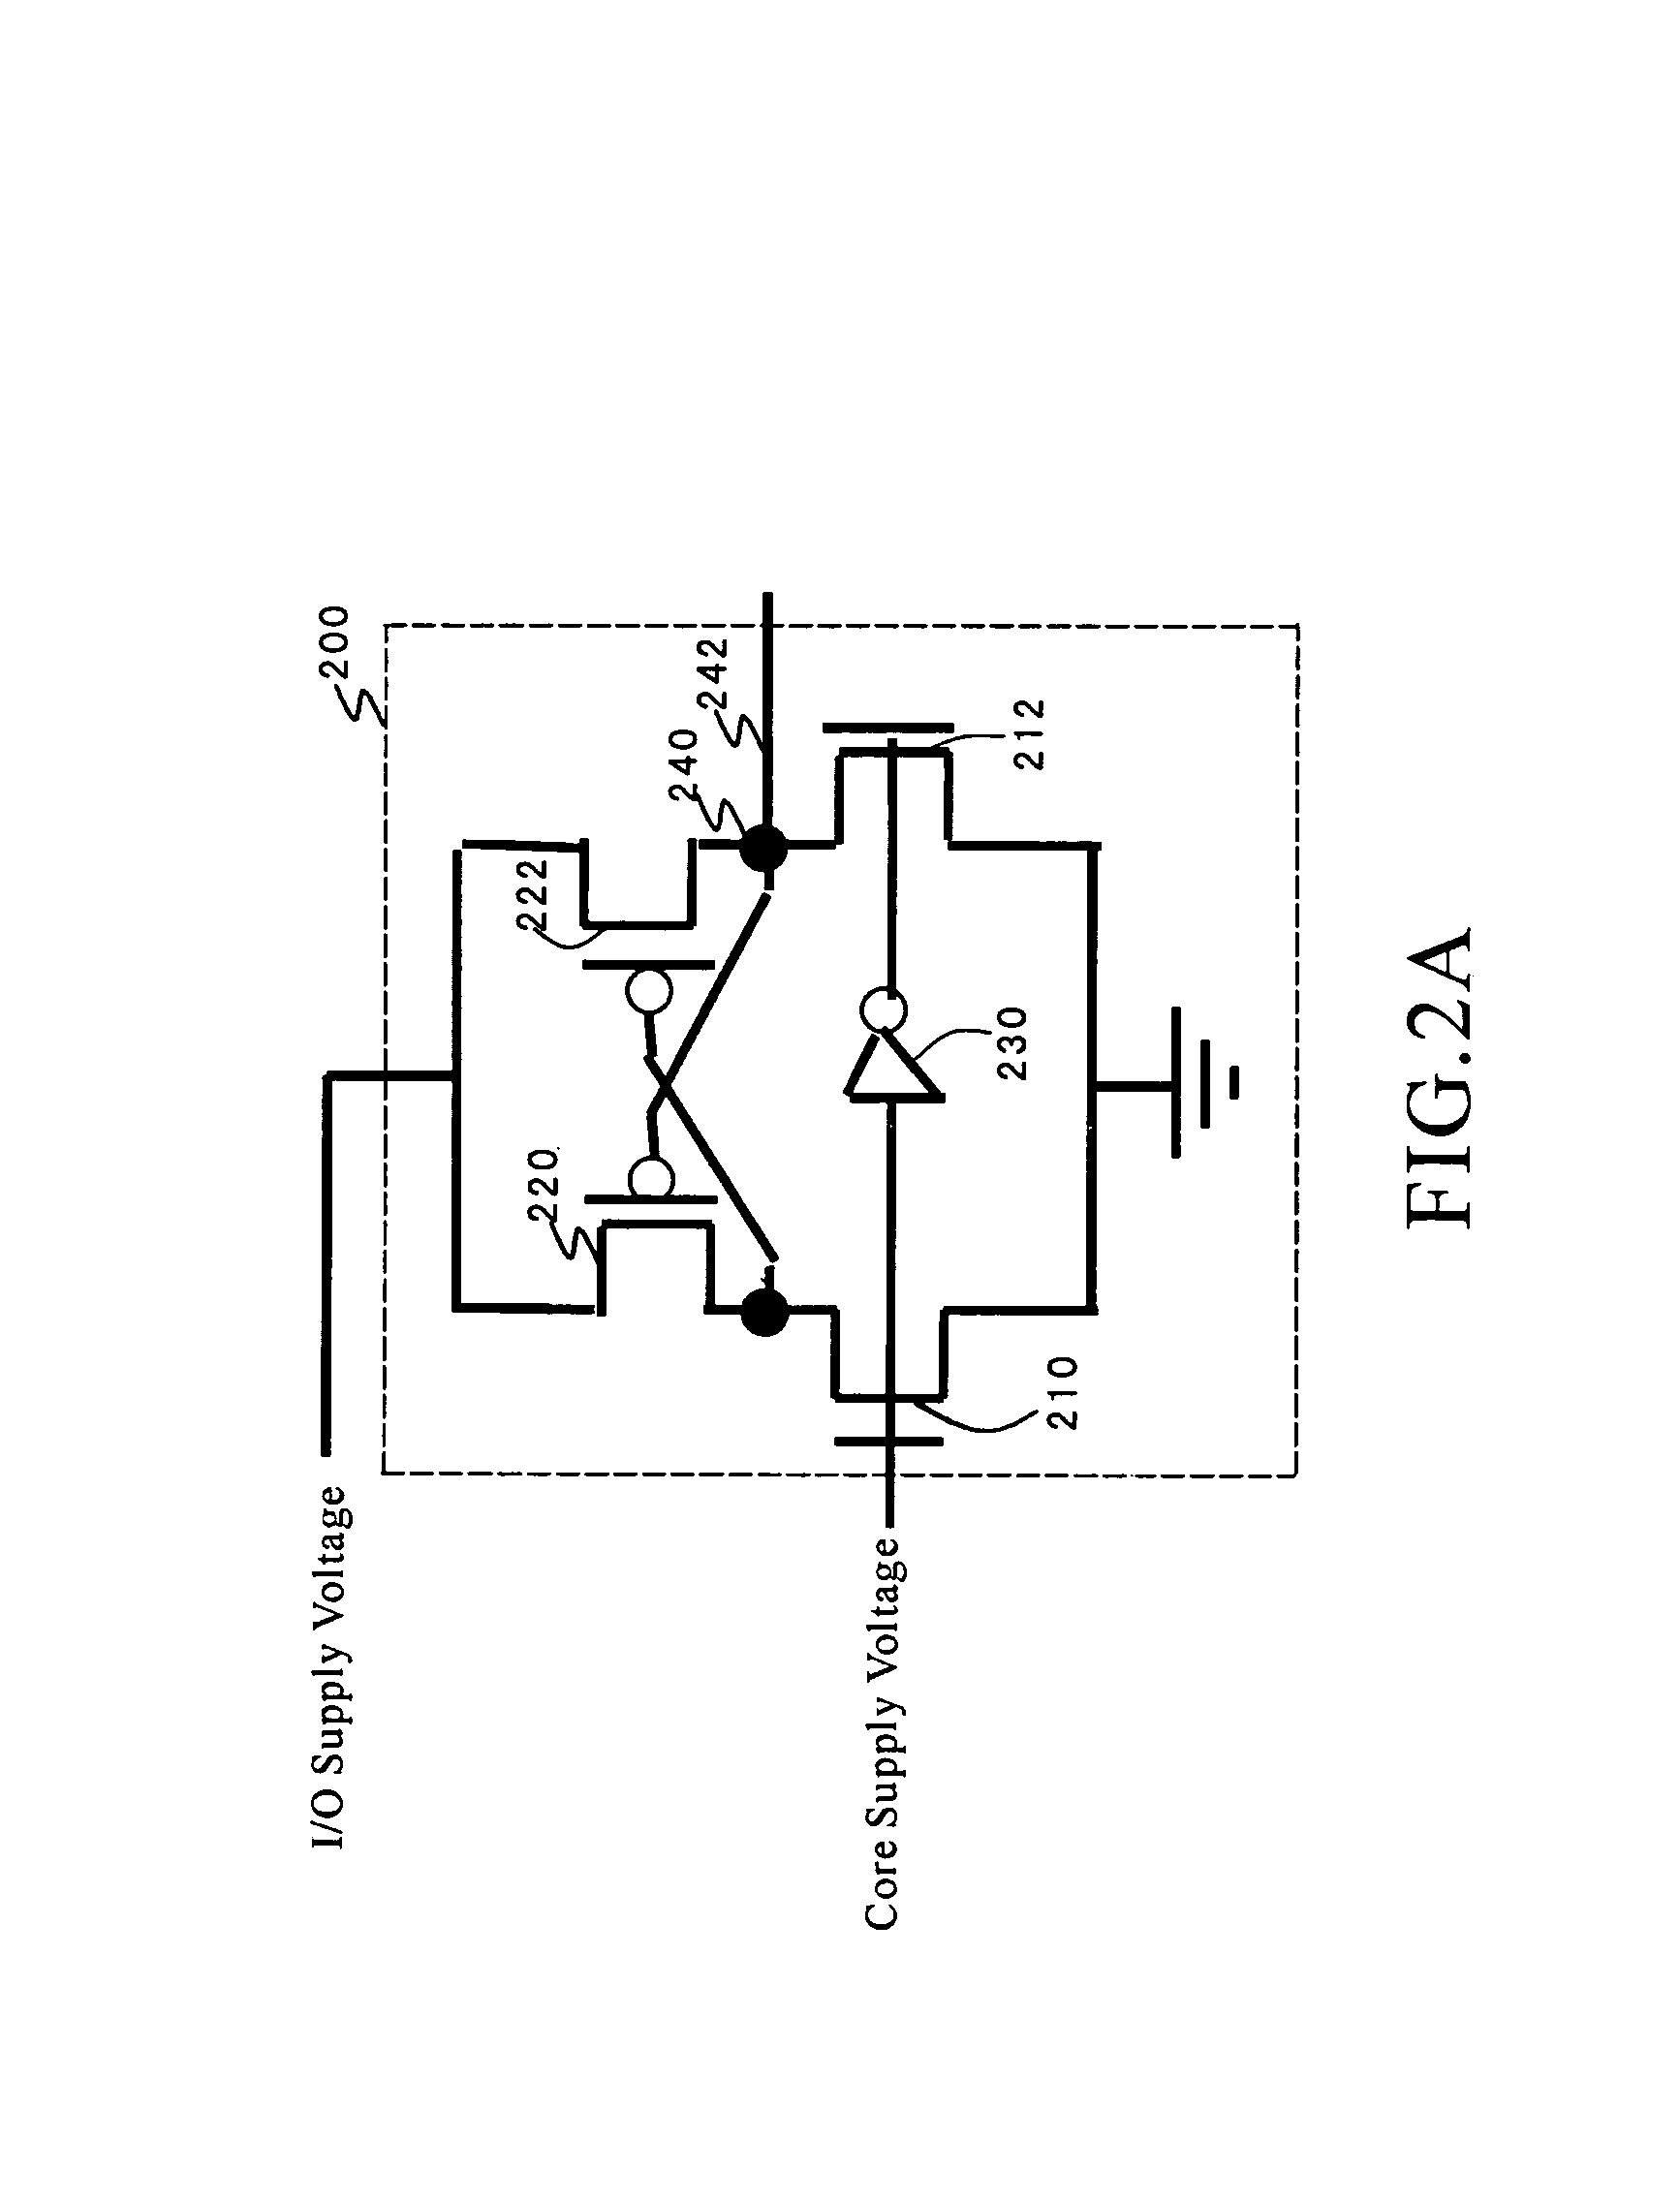 System and method for power-on control of input/output drivers